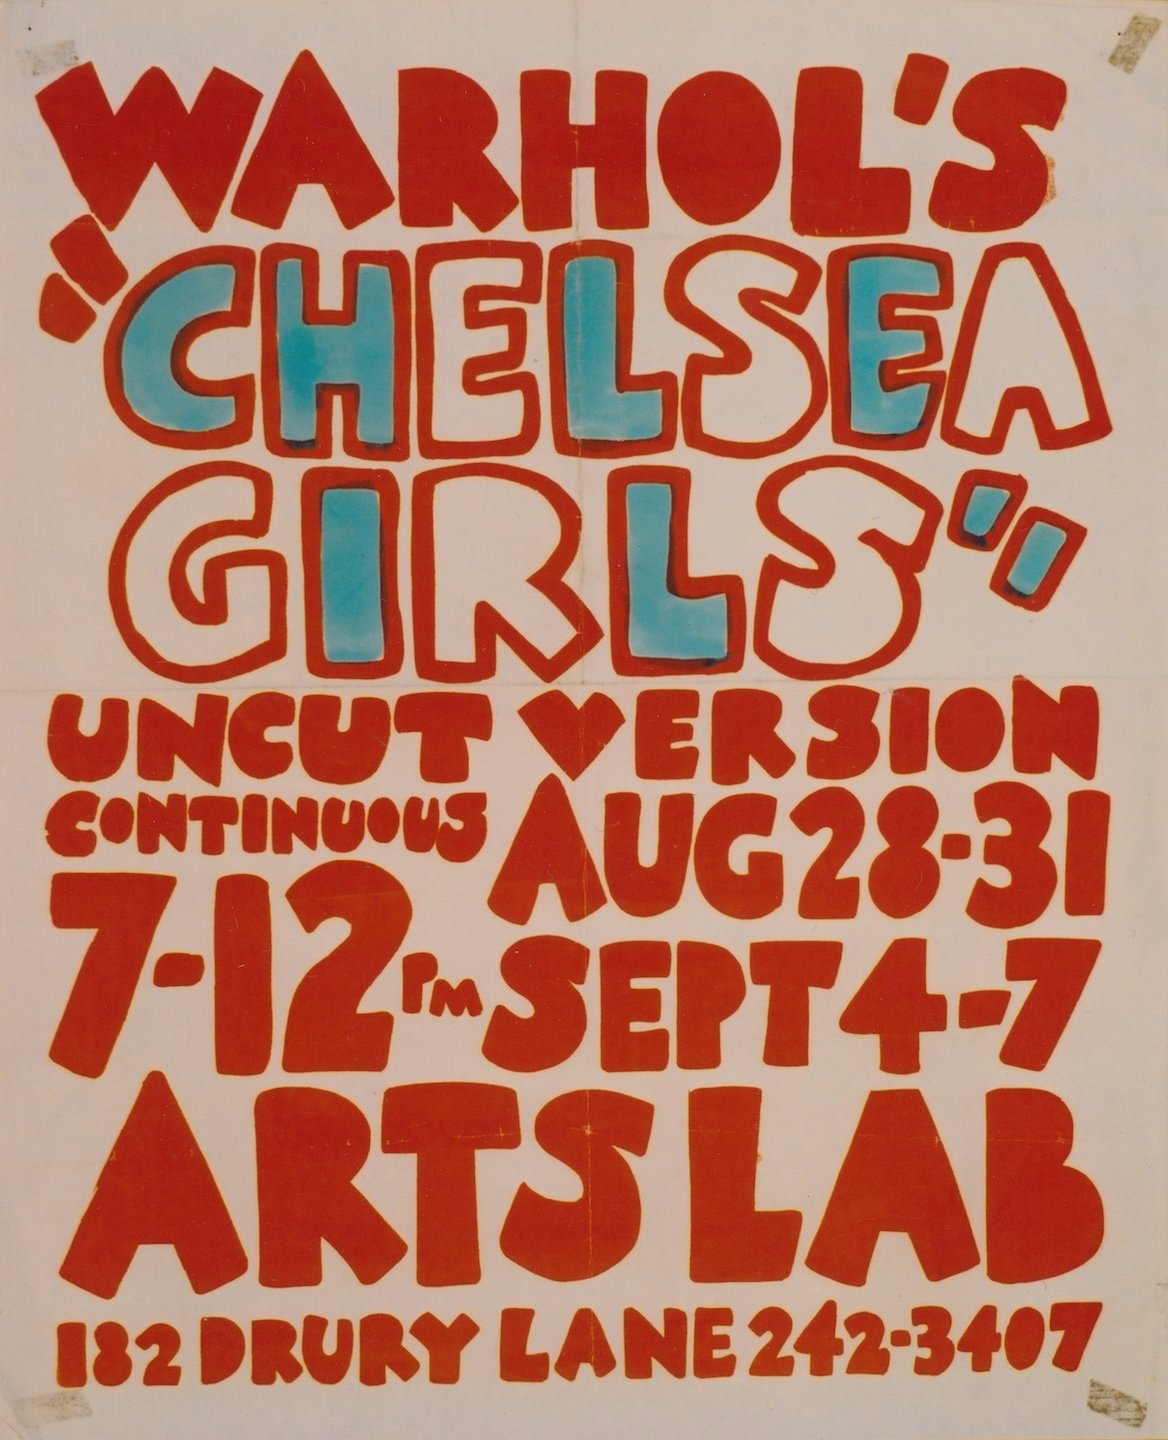 Poster for early screenings of Andy Warhol's Chelsea Girls at the Arts Lab.